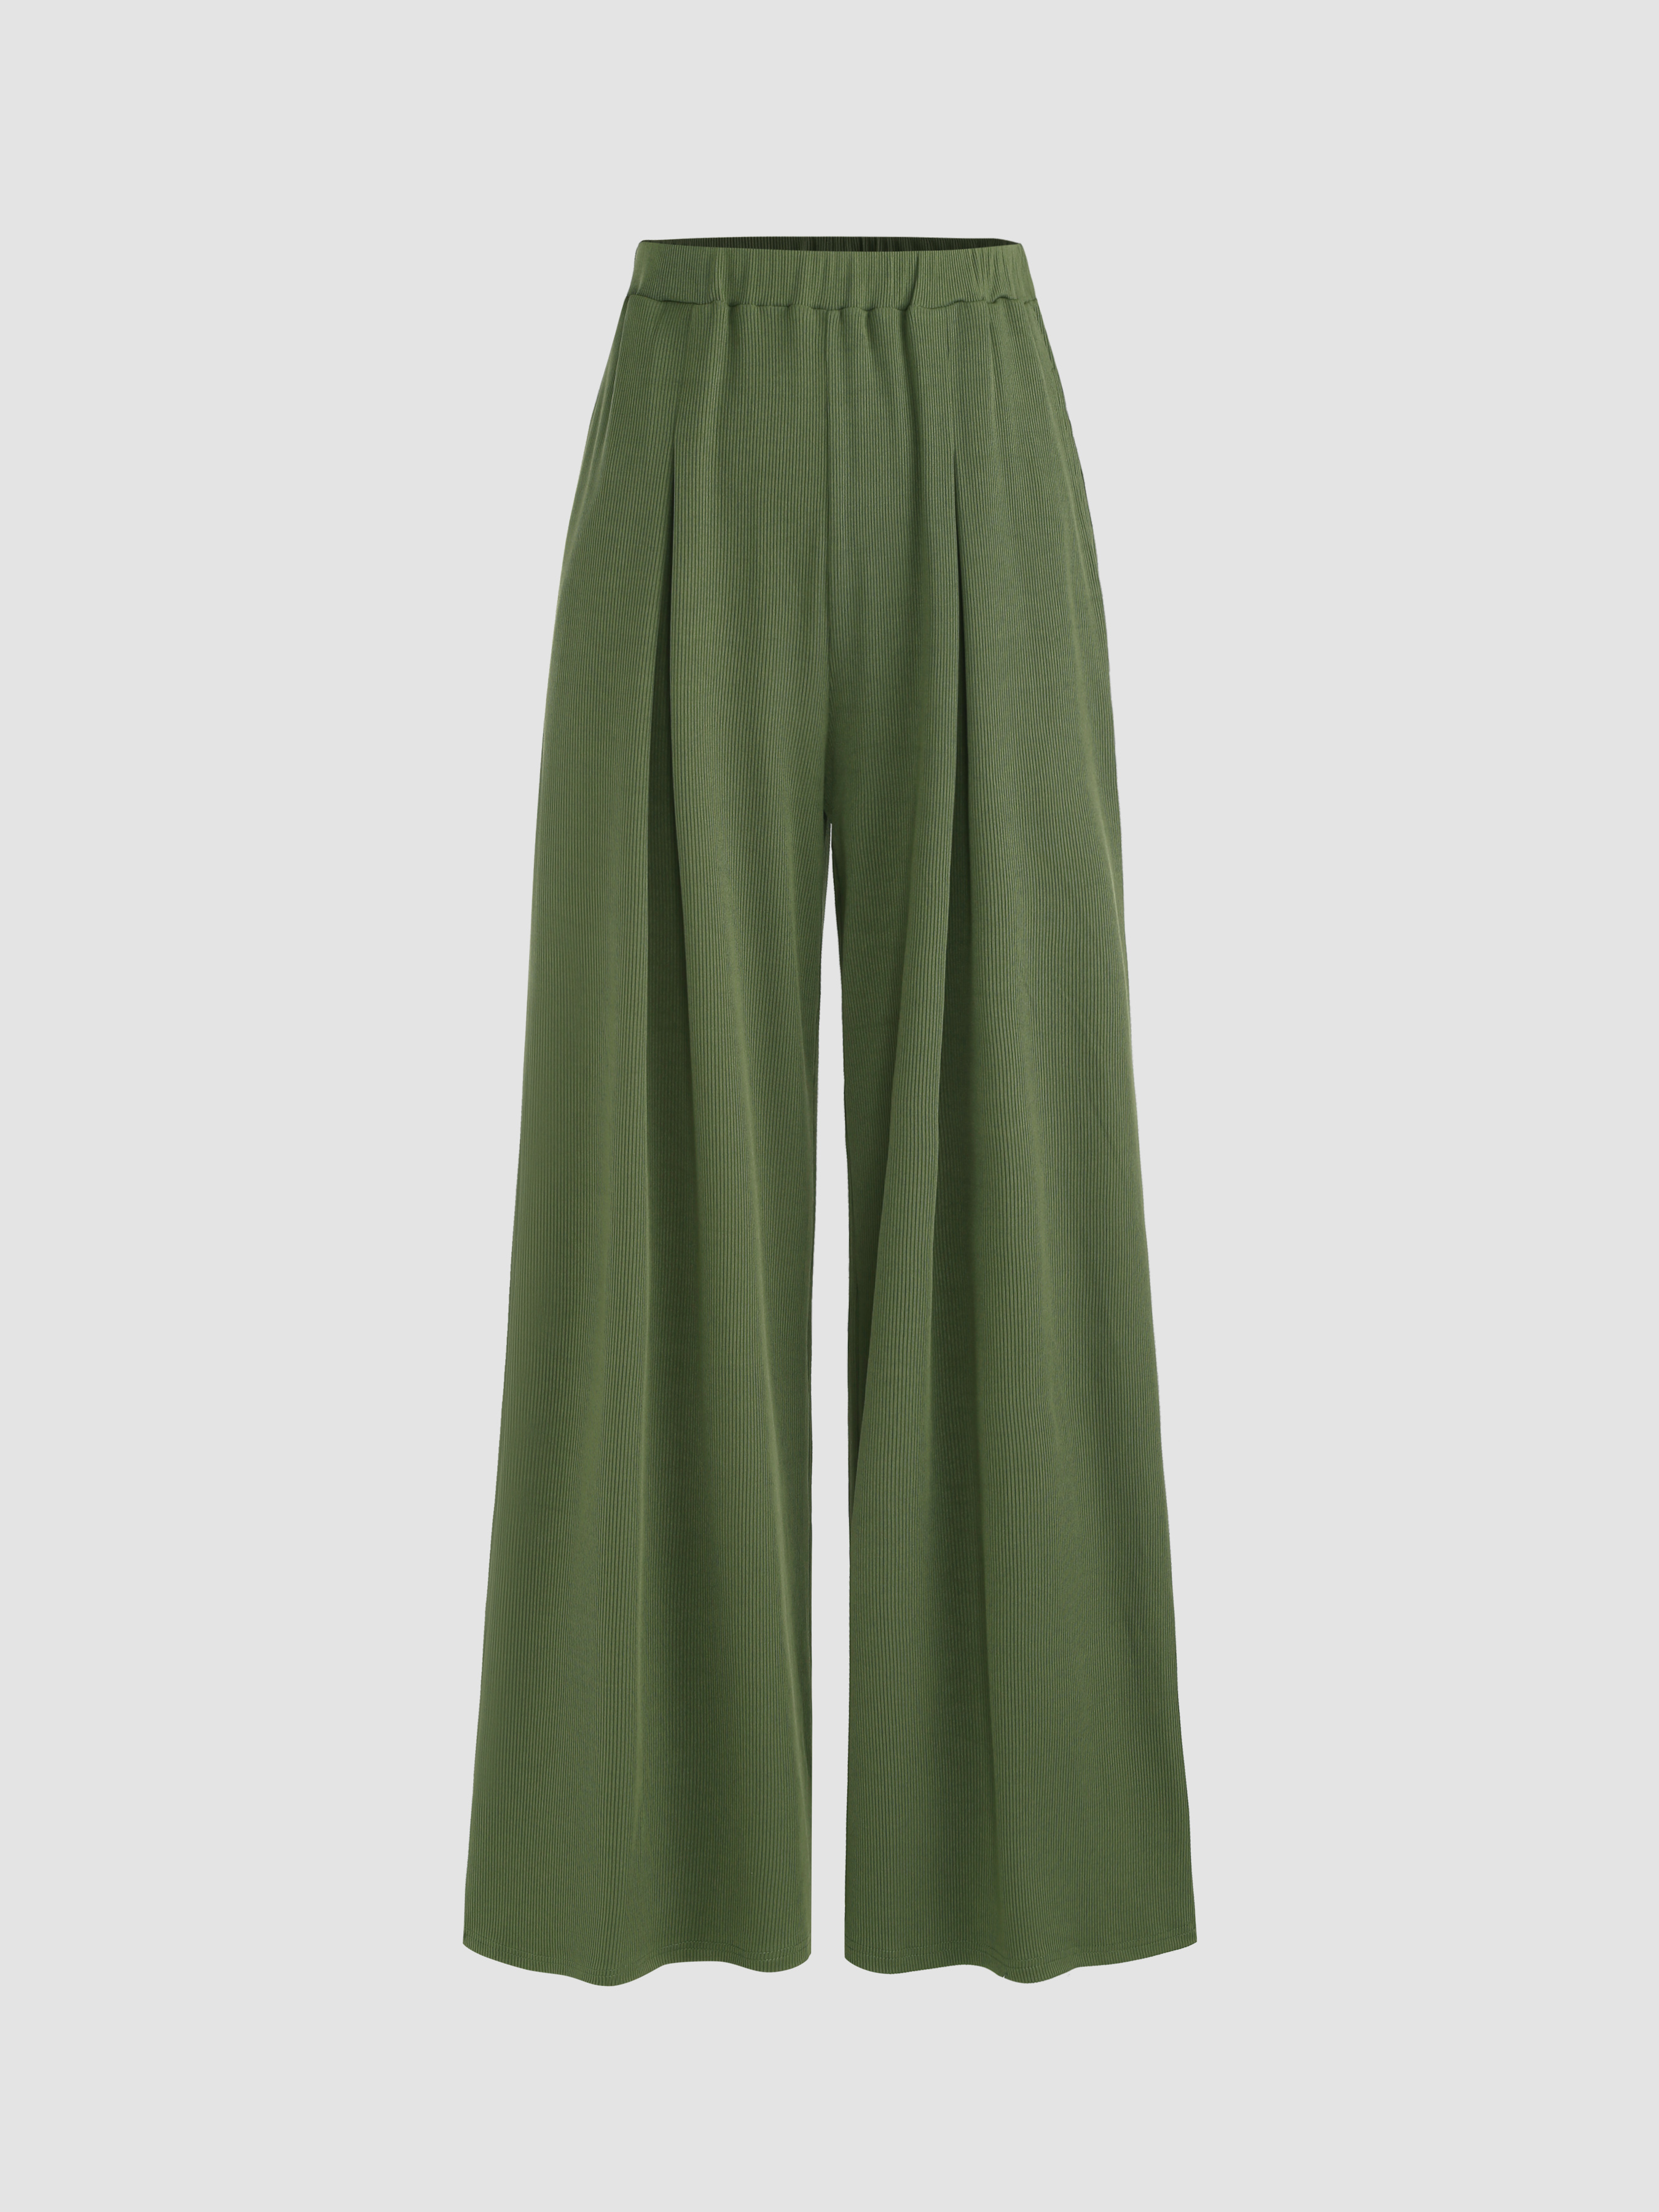 Ladies Womens Ruffle Frill Bell Bottom Trousers High Waisted Palazzo  Cigarette | eBay